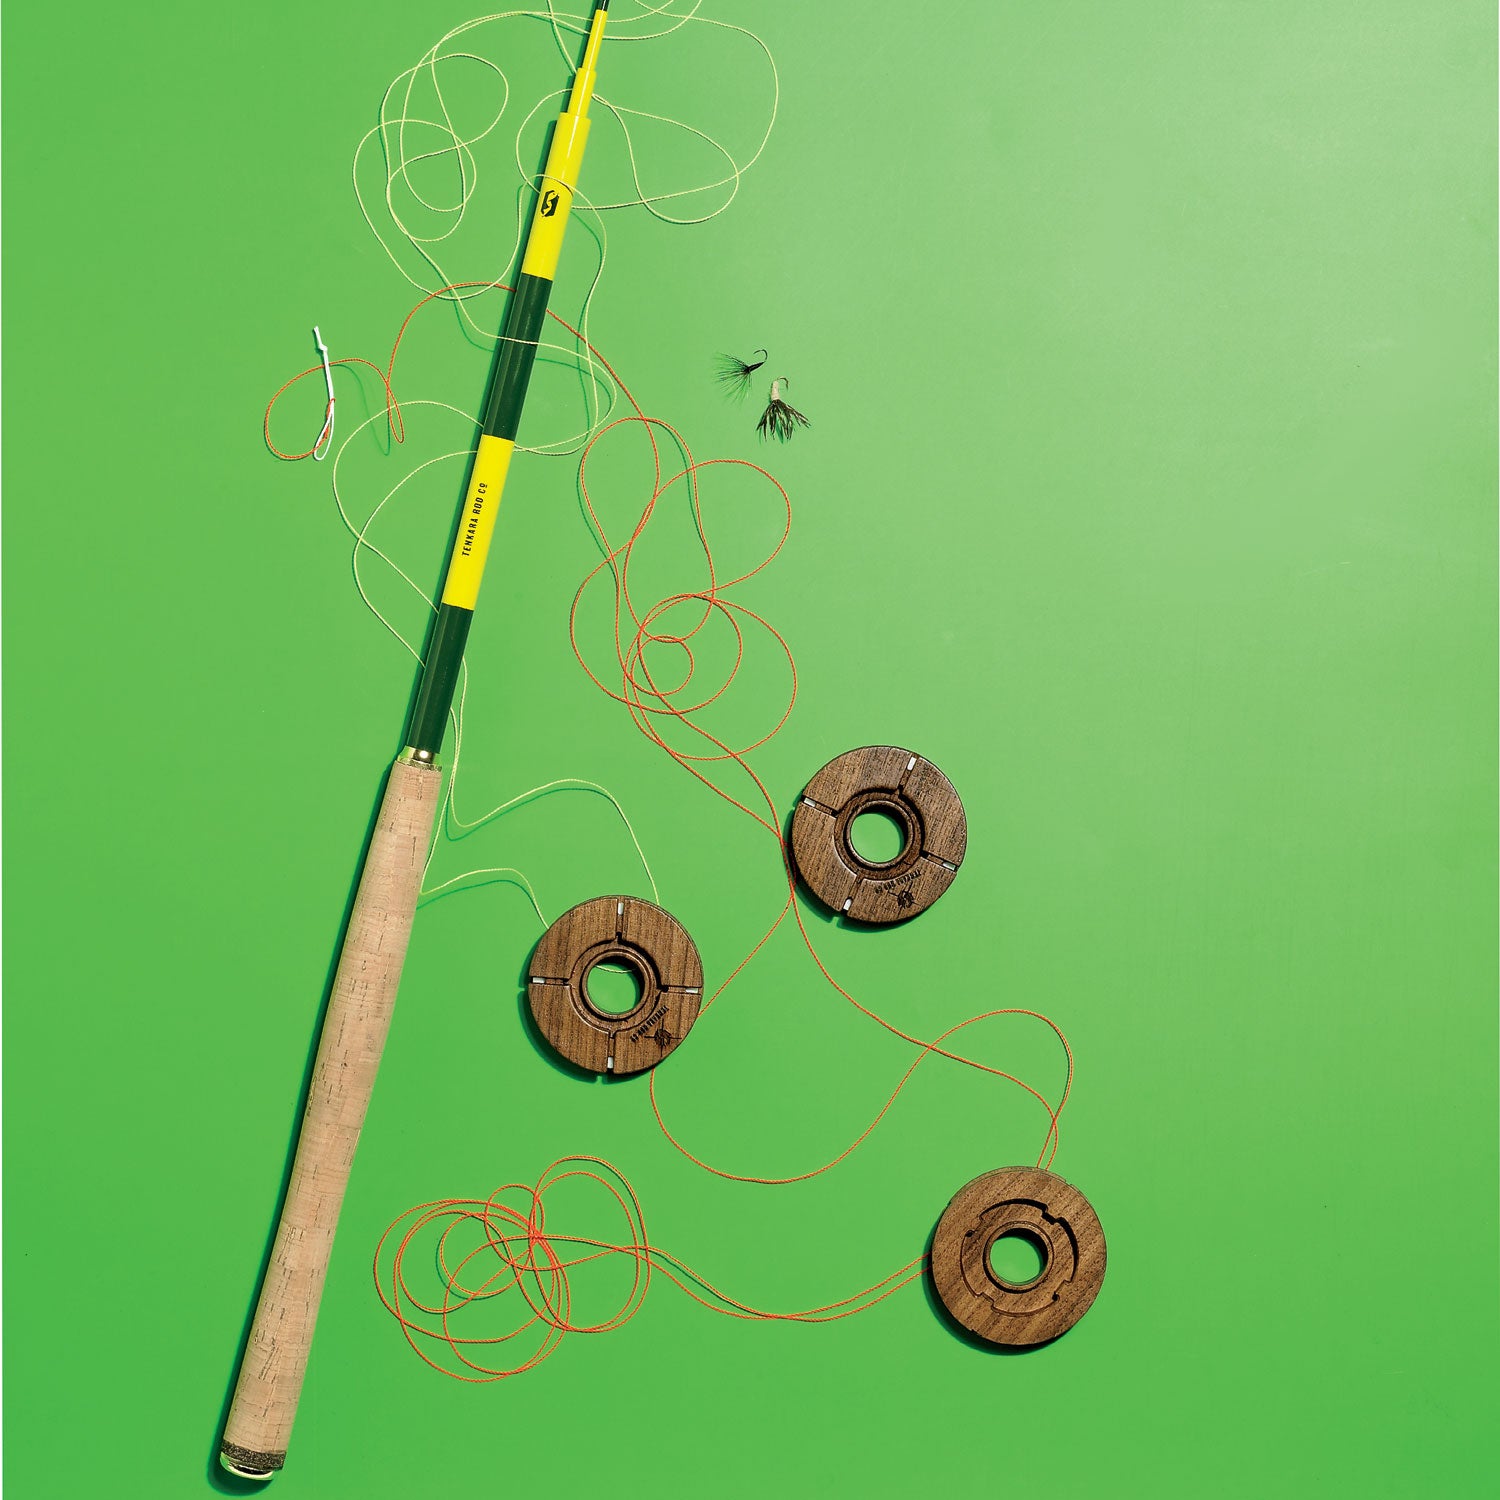 A Tool for the Minimalist Fisherman